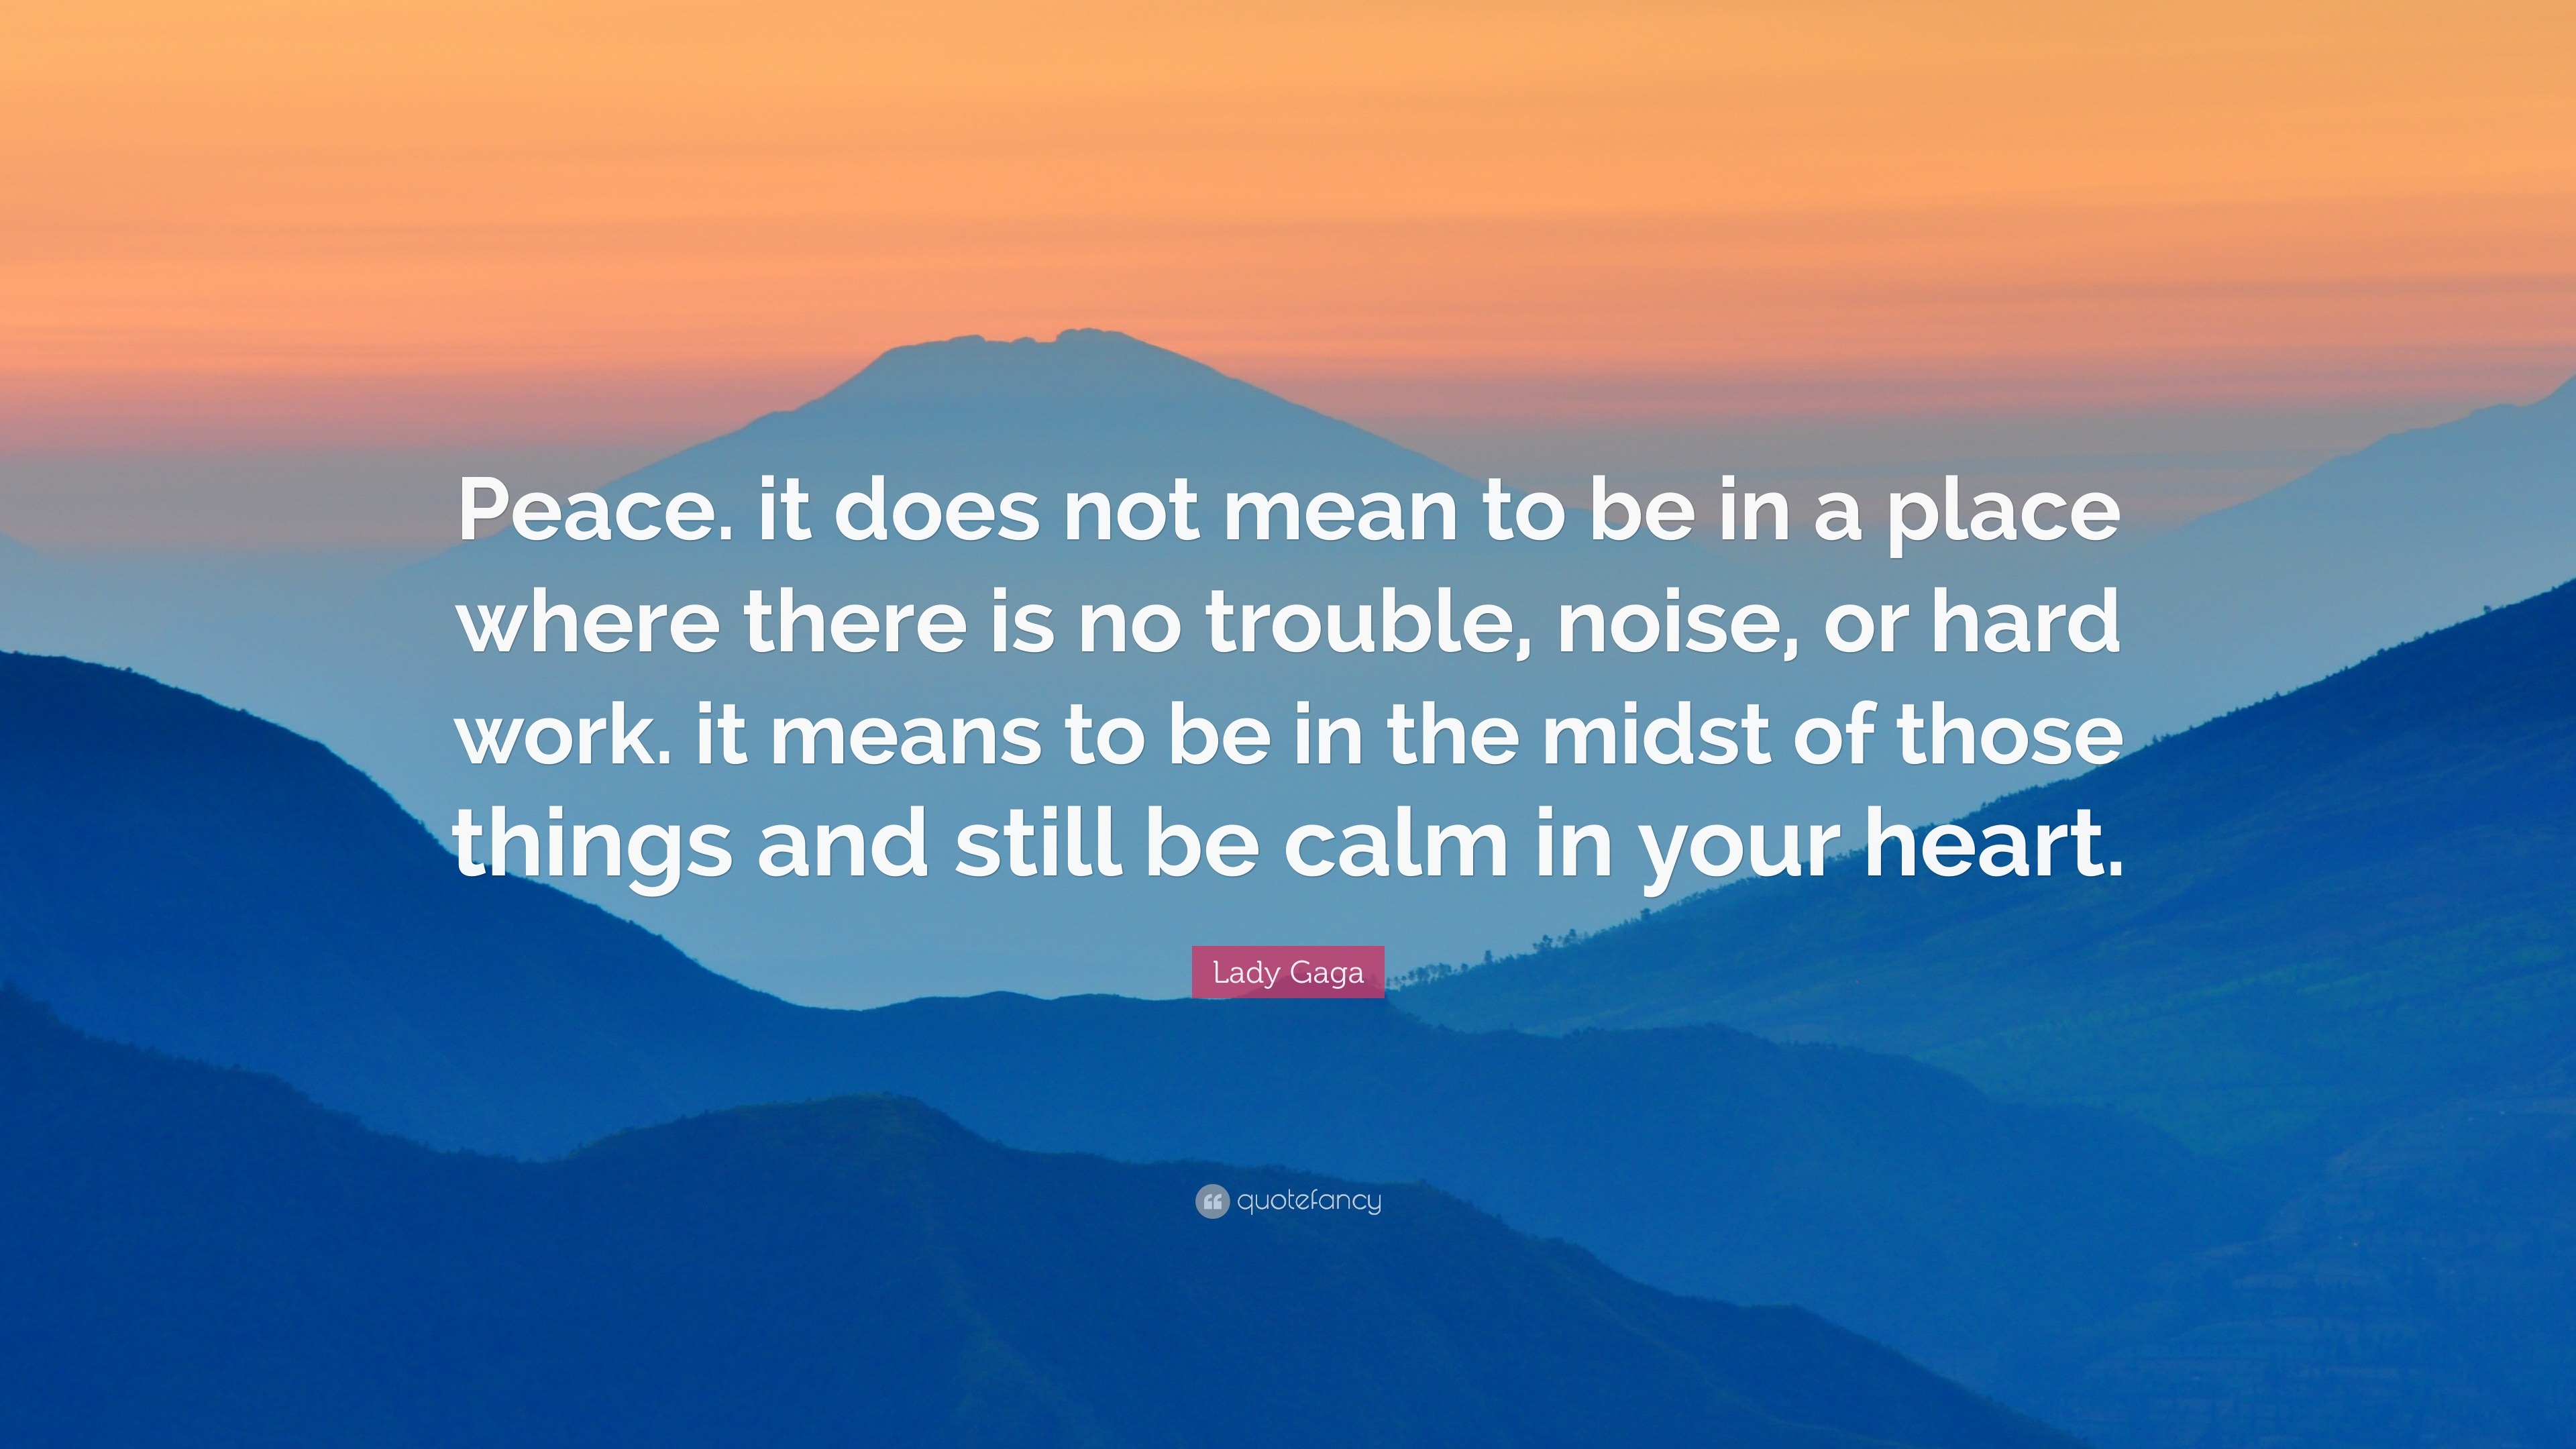 Lady Gaga Quote: “Peace. it does not mean to be in a place where there ...